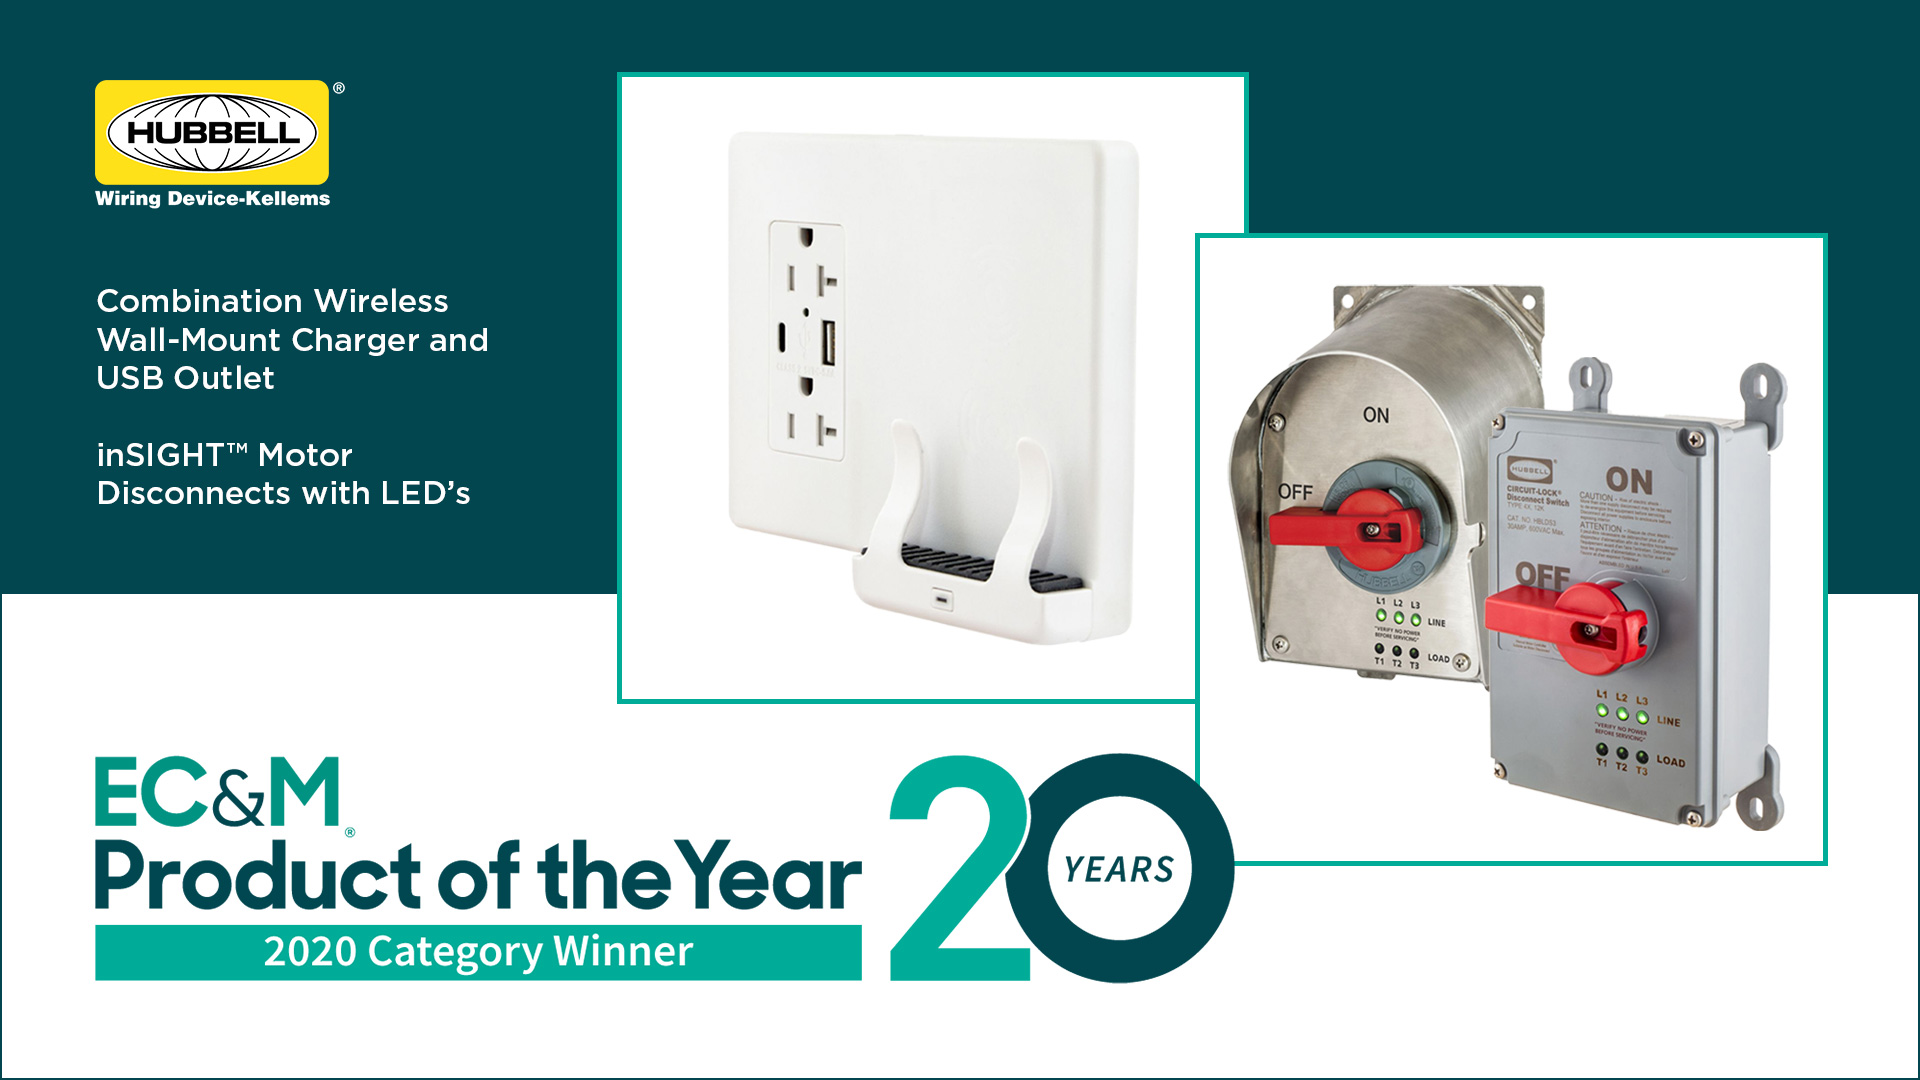 Hubbell Wiring Device-Kellems Takes Home Two 2020 EC&M Product of the Year Category Winner Awards